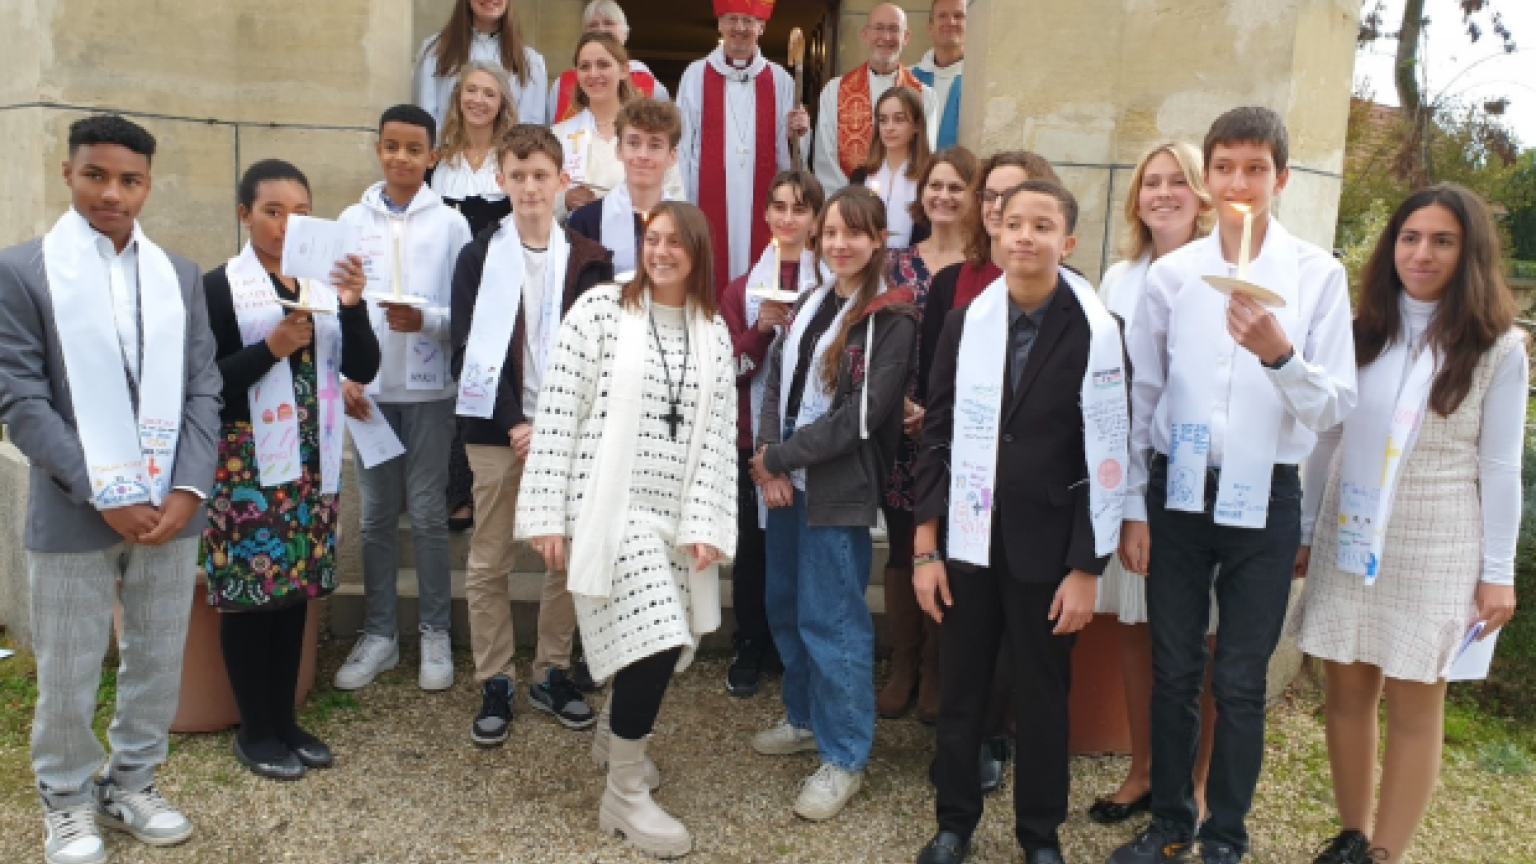 Bishop Robert and a group of young French Christians.